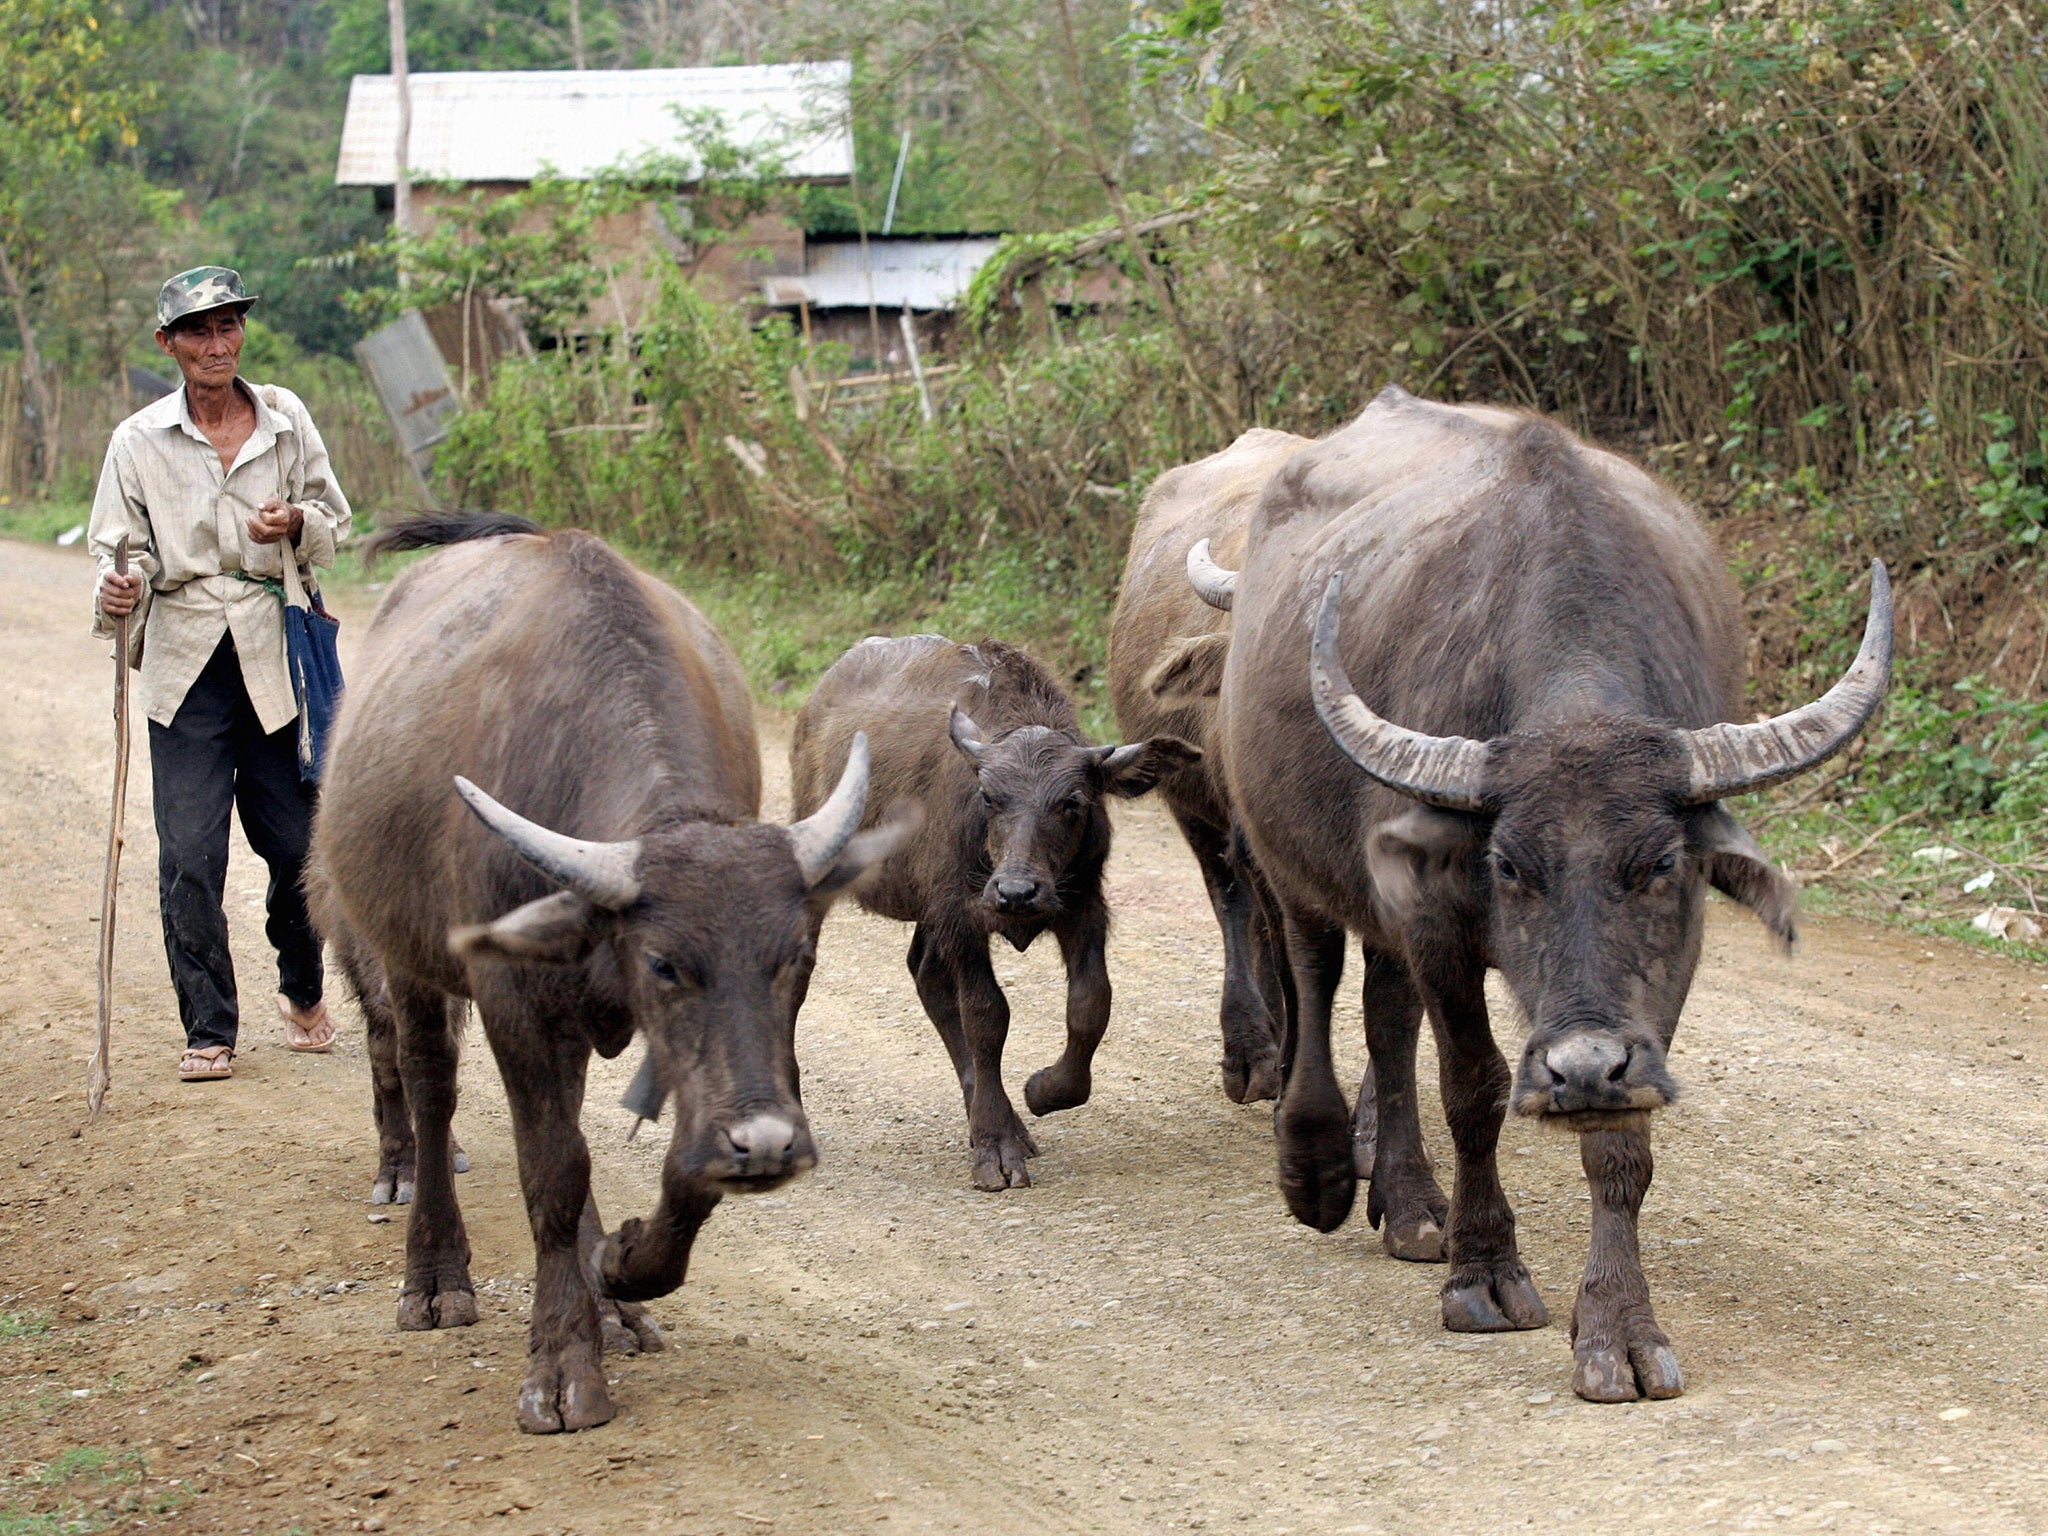 Water buffalo are found in India as well as across Asia